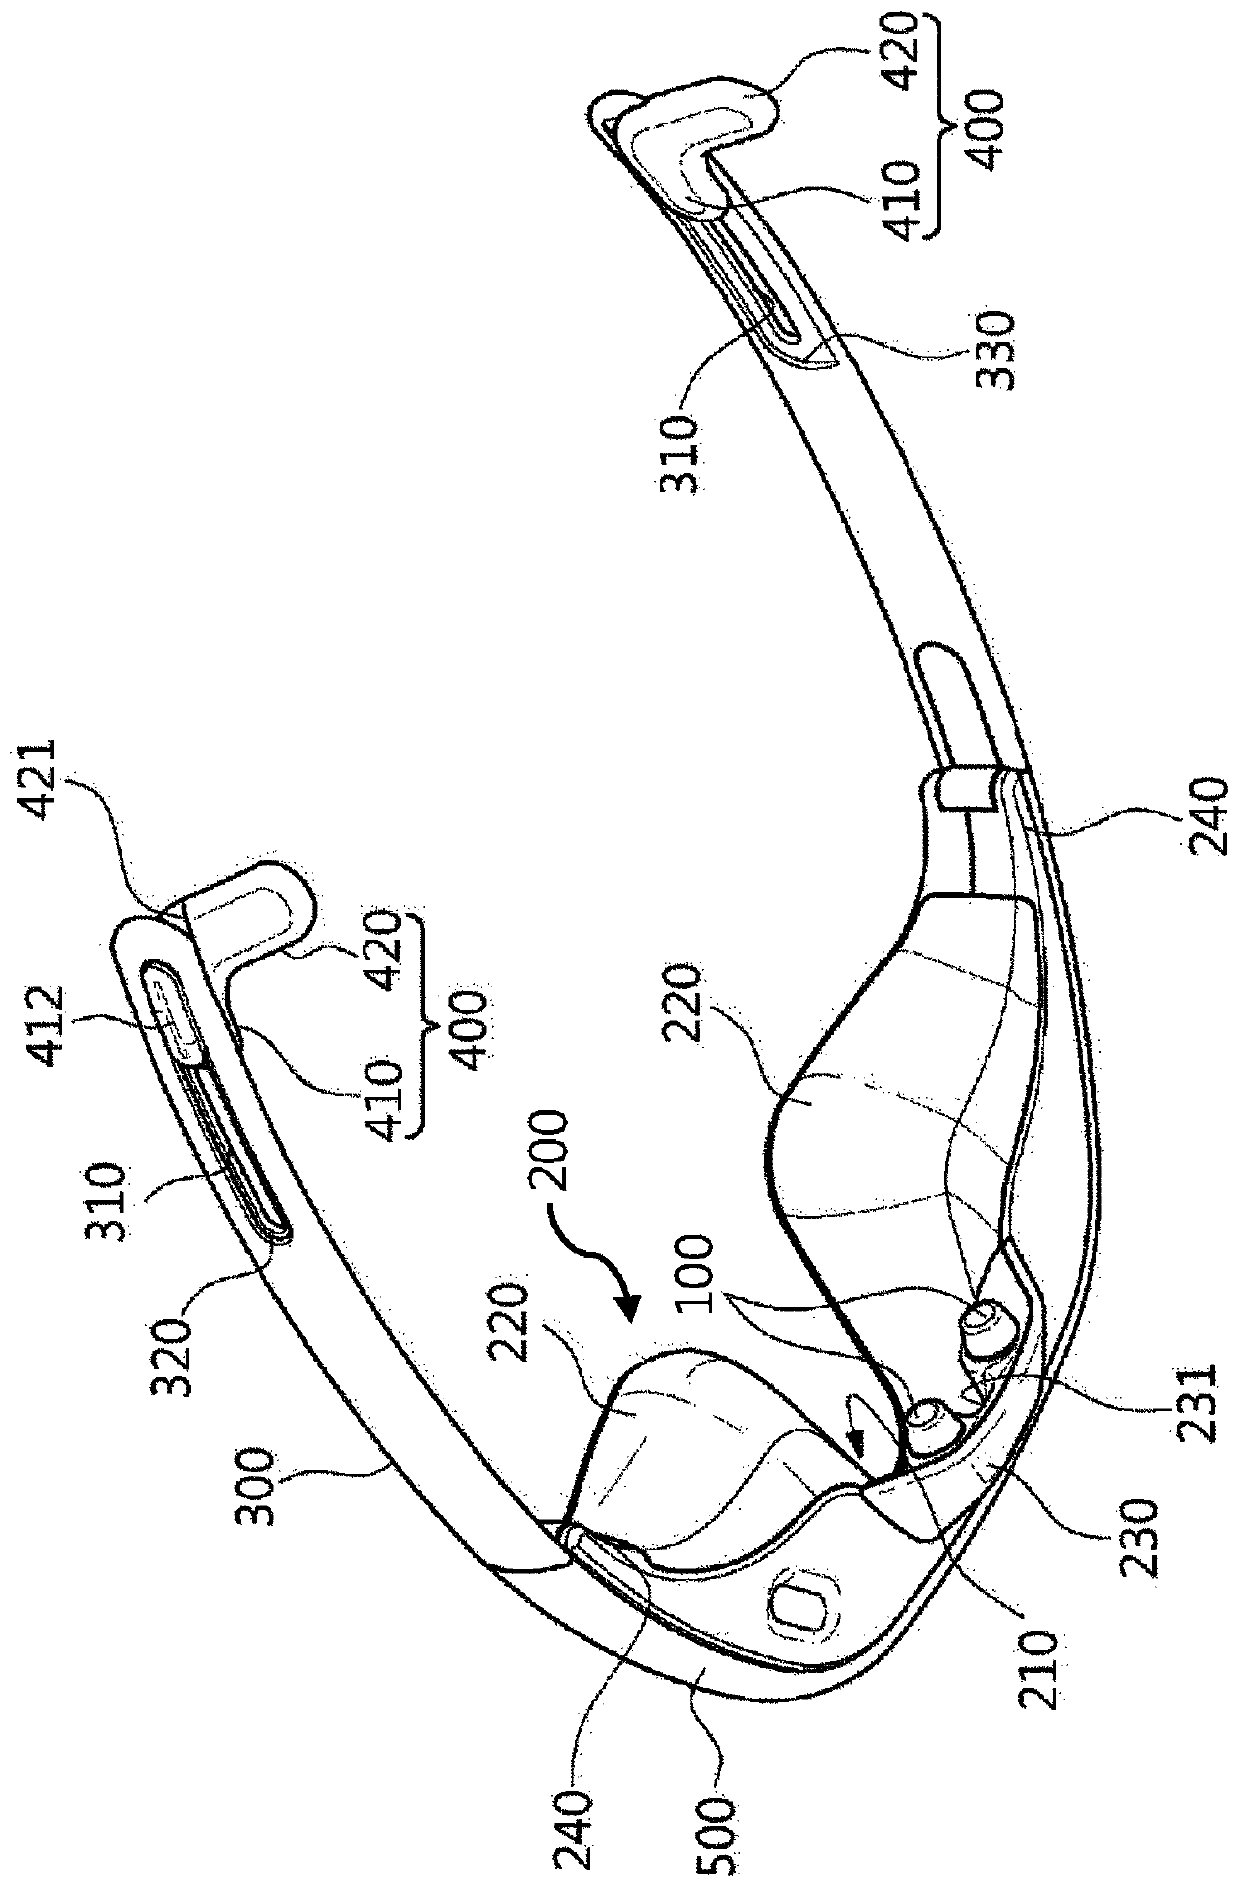 Face-wearable rhinitis treatment device using light therapy